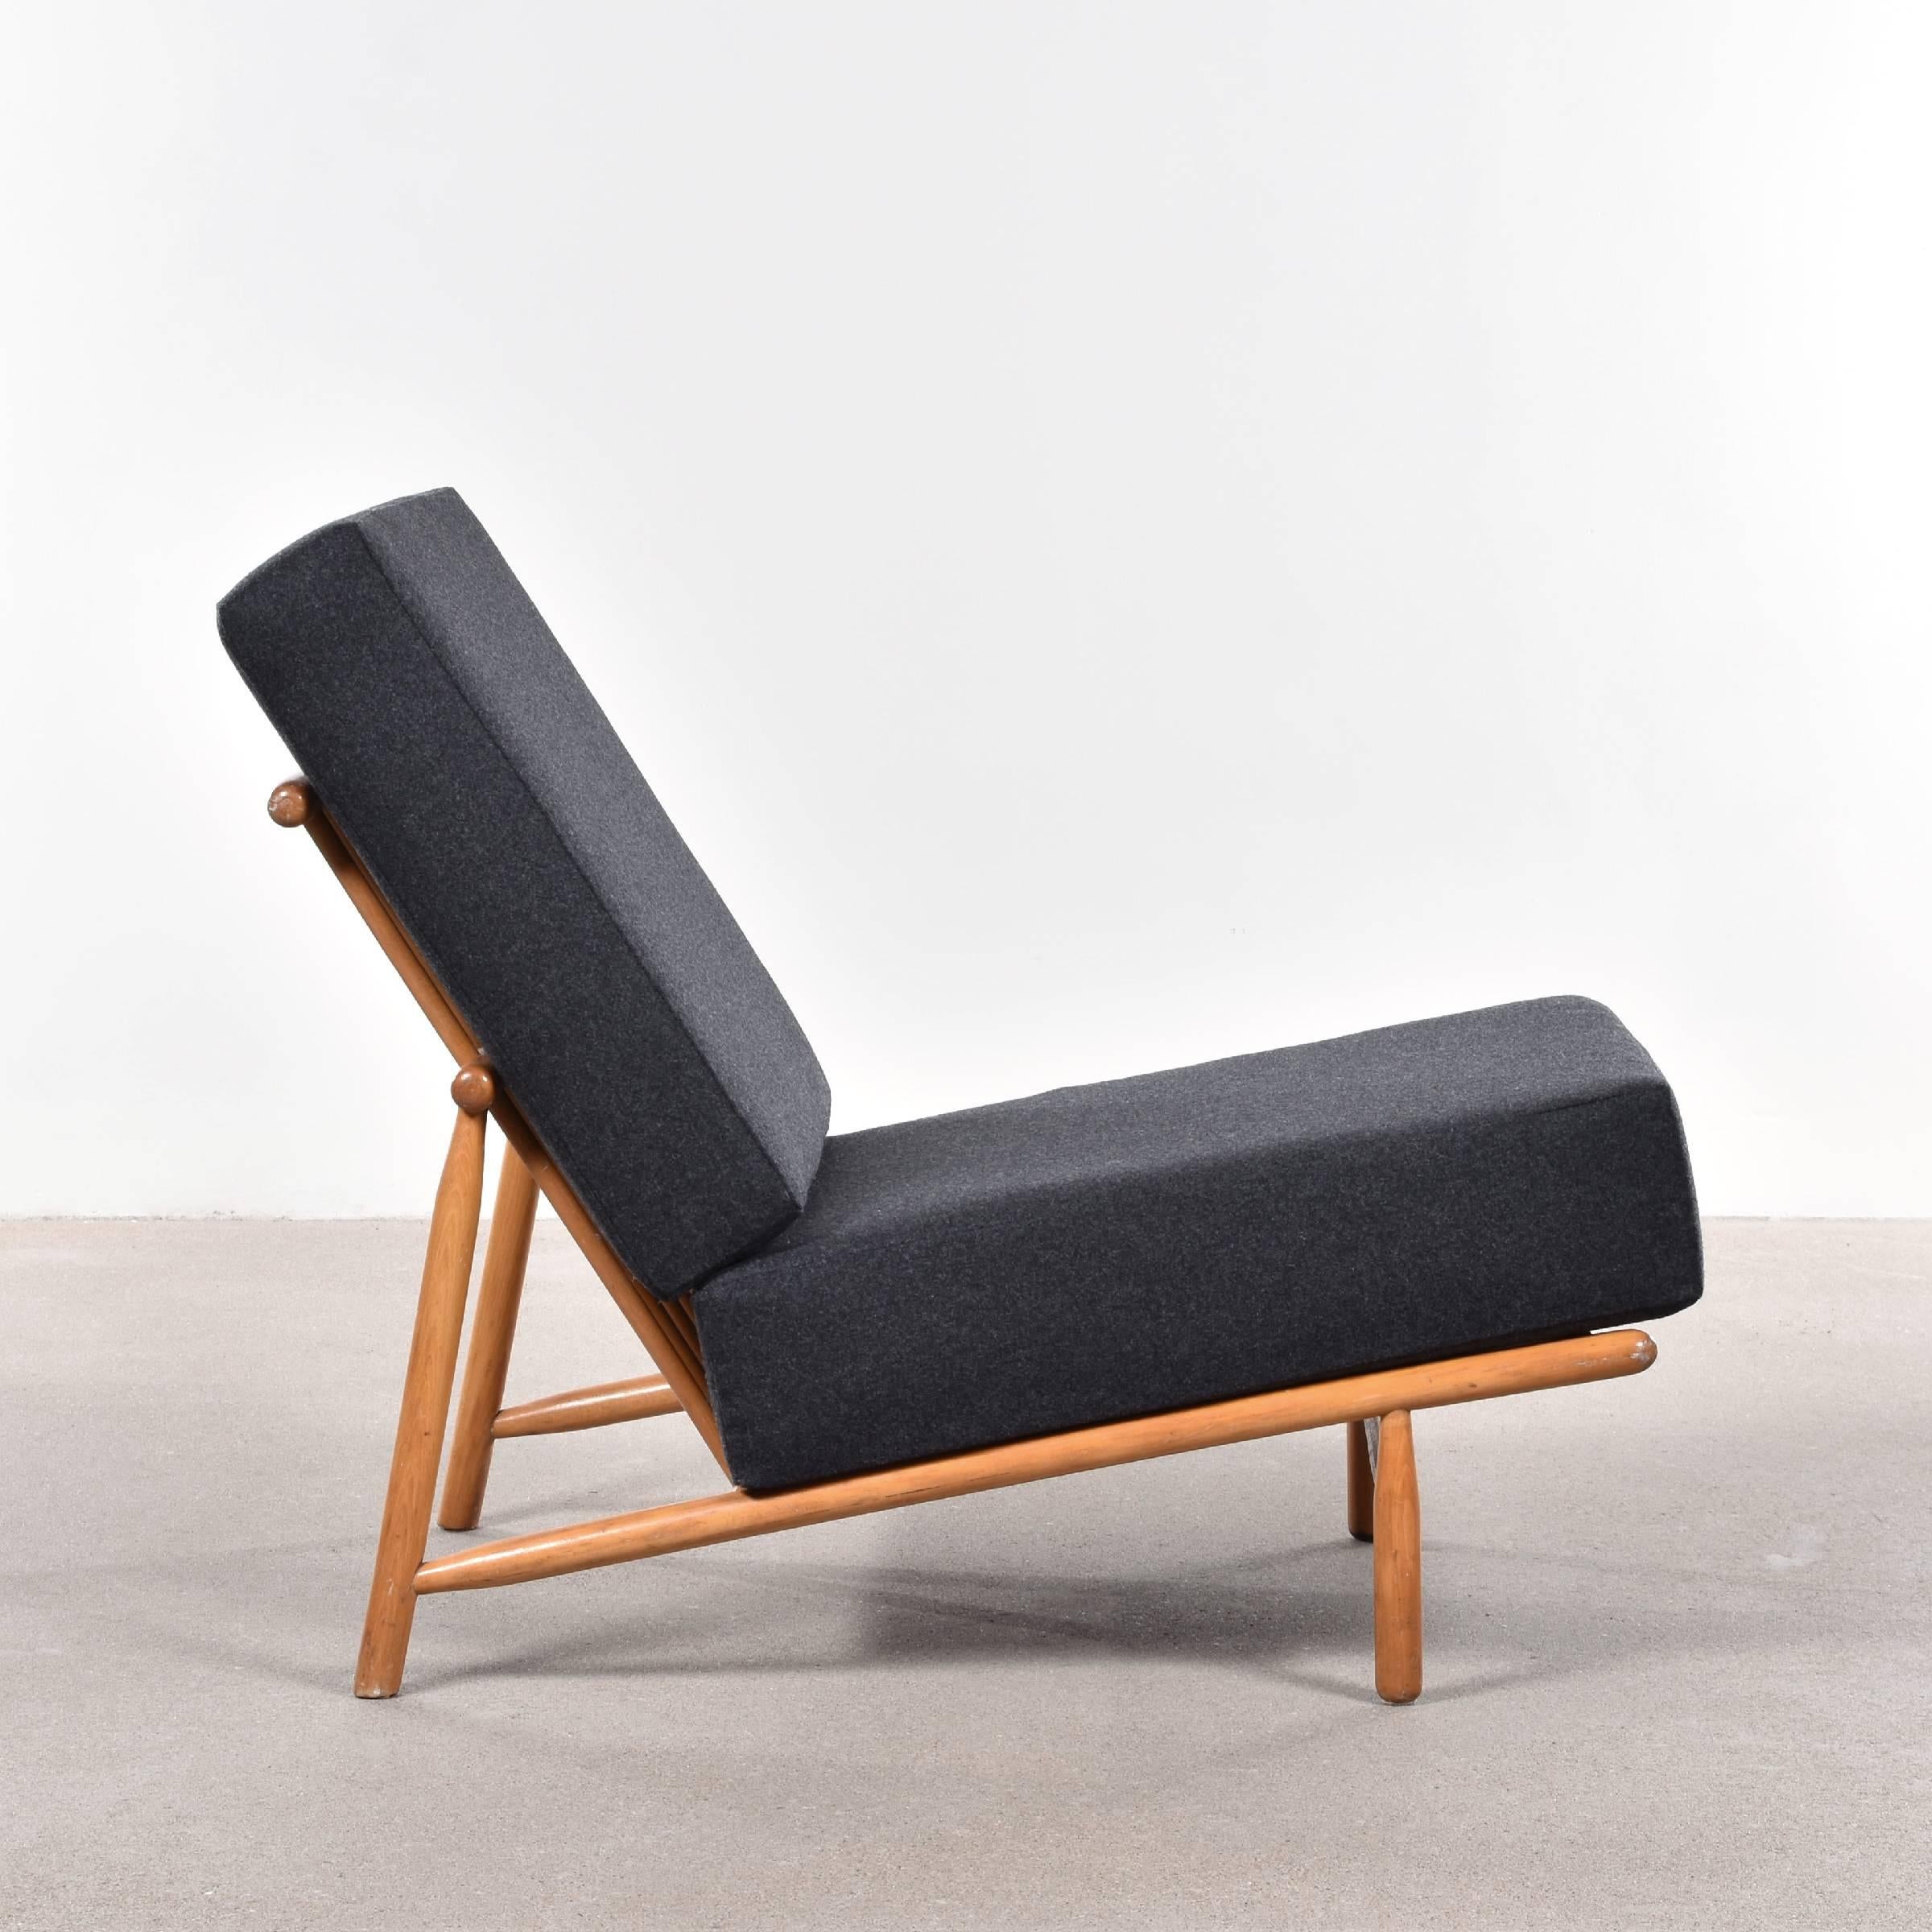 Stylish lounge chair by Alf Svensson for Artifort Netherlands (DUX Collection). Very good condition with beech wooden frame and new dark grey/charcoal wool upholstery.

Free shipping for European destinations!

We strive for a high level of